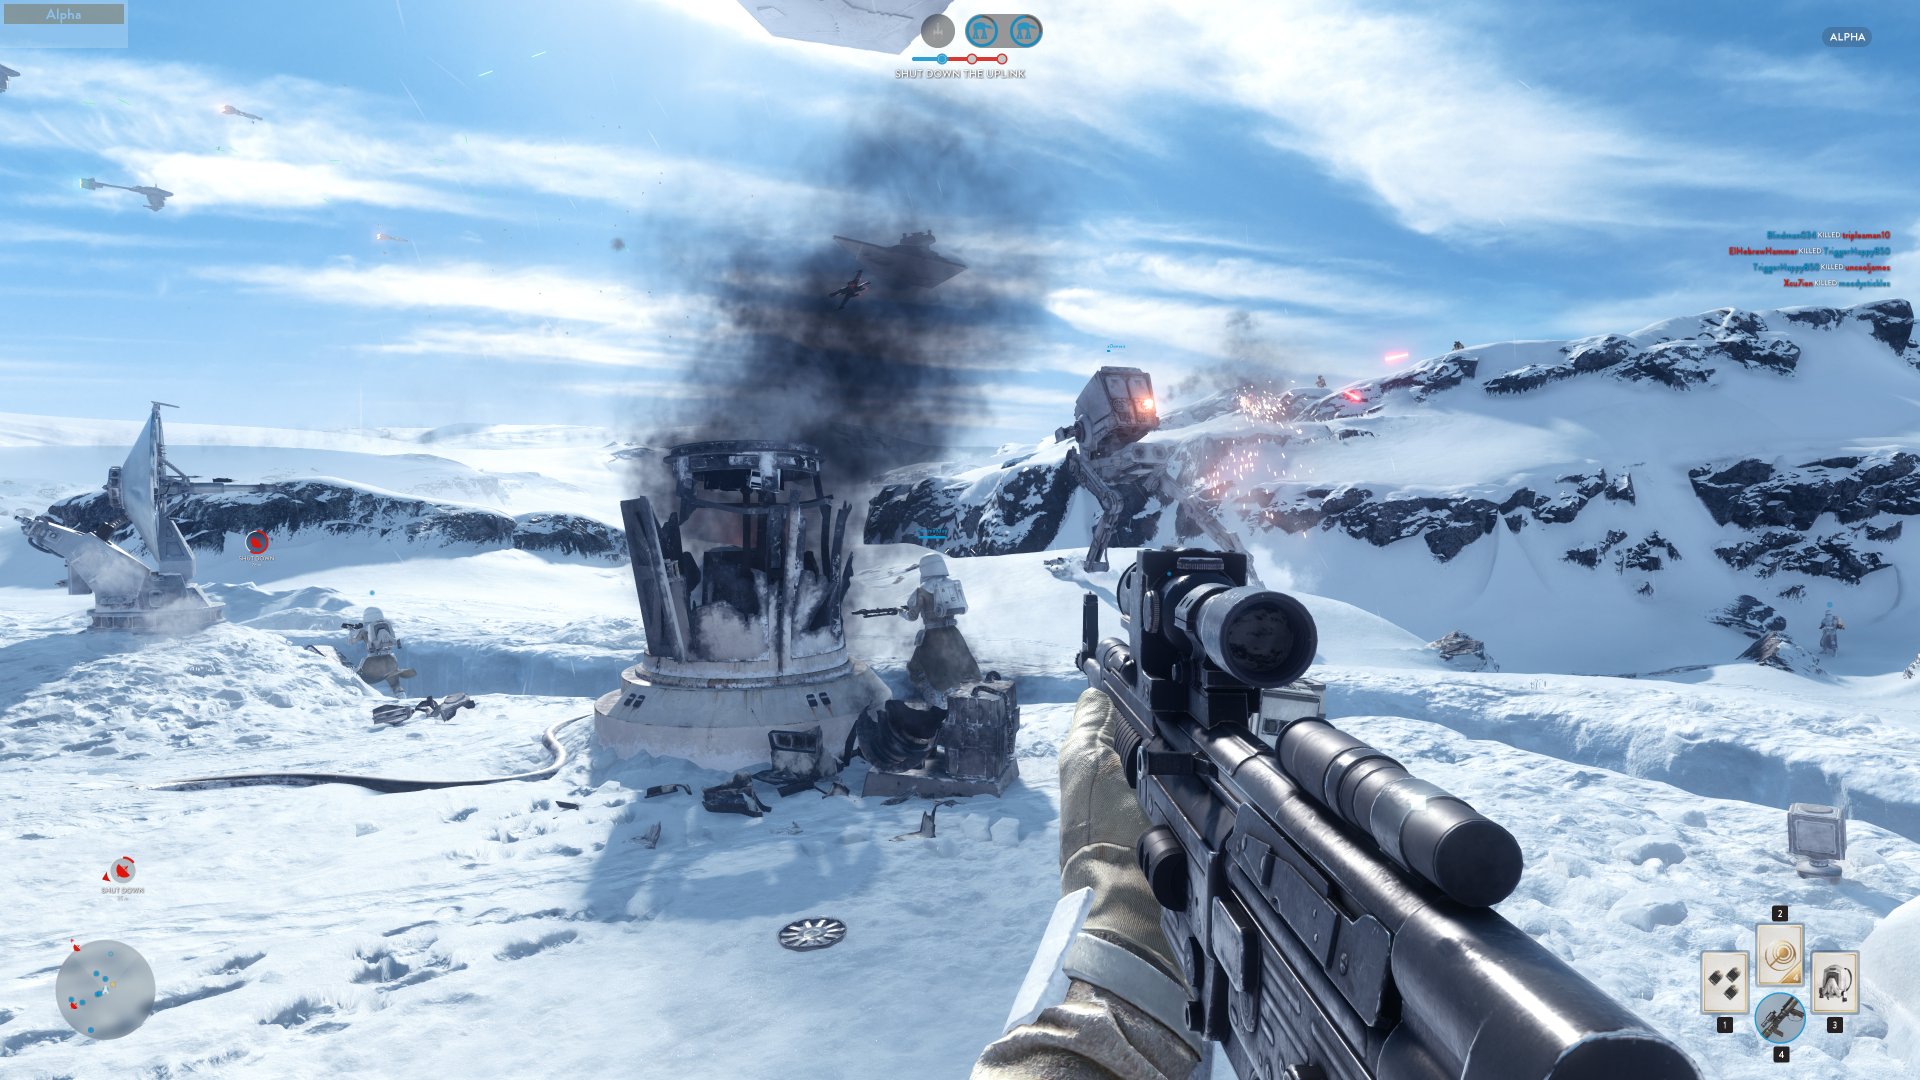 glide pensum Regulering Co-Optimus - News - Star Wars Battlefront Gets Split Screen on PS4 and Xbox  One; Not for PC